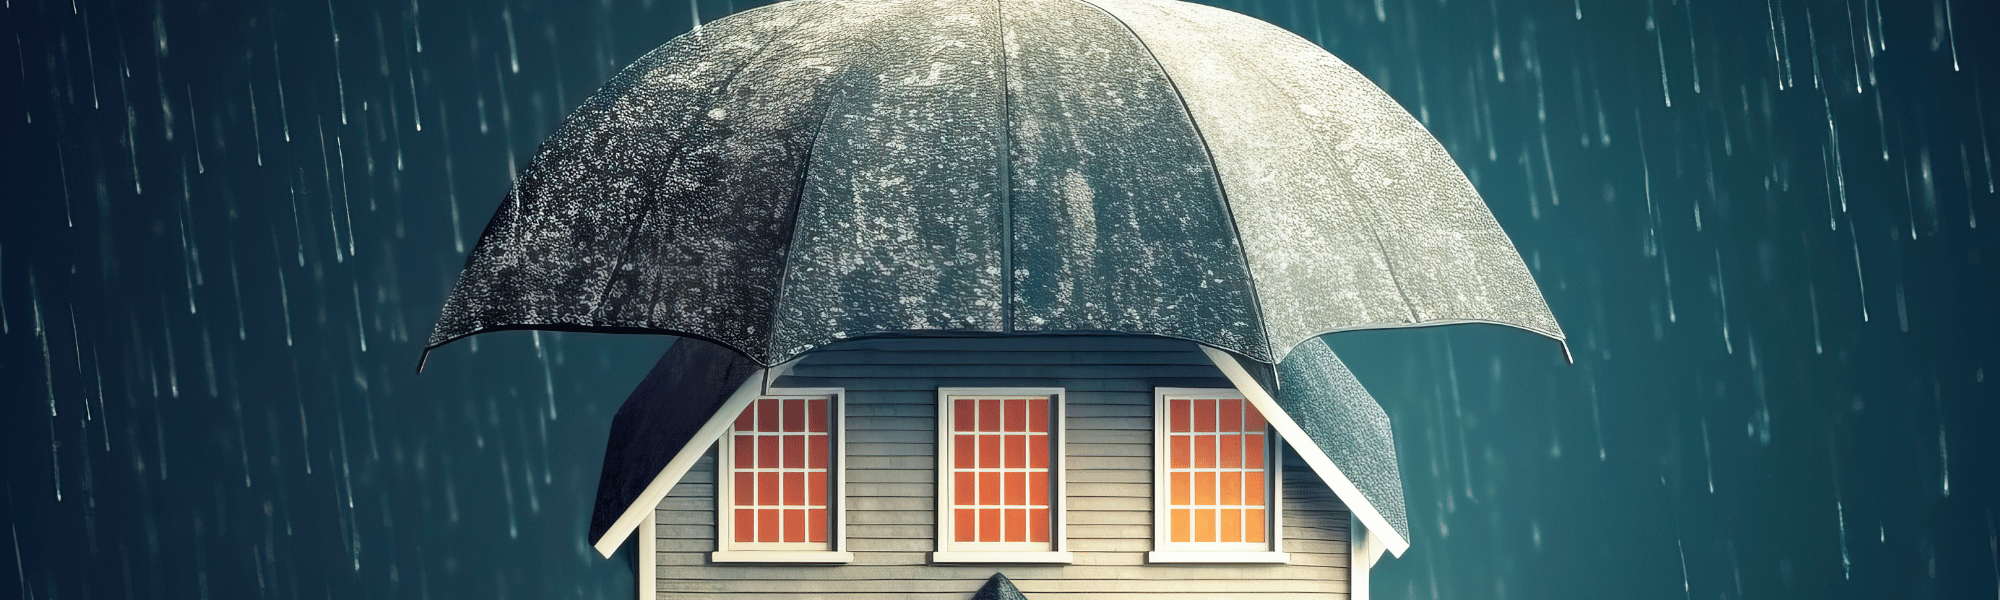 close up of a house with an umbrella protecting it from rain